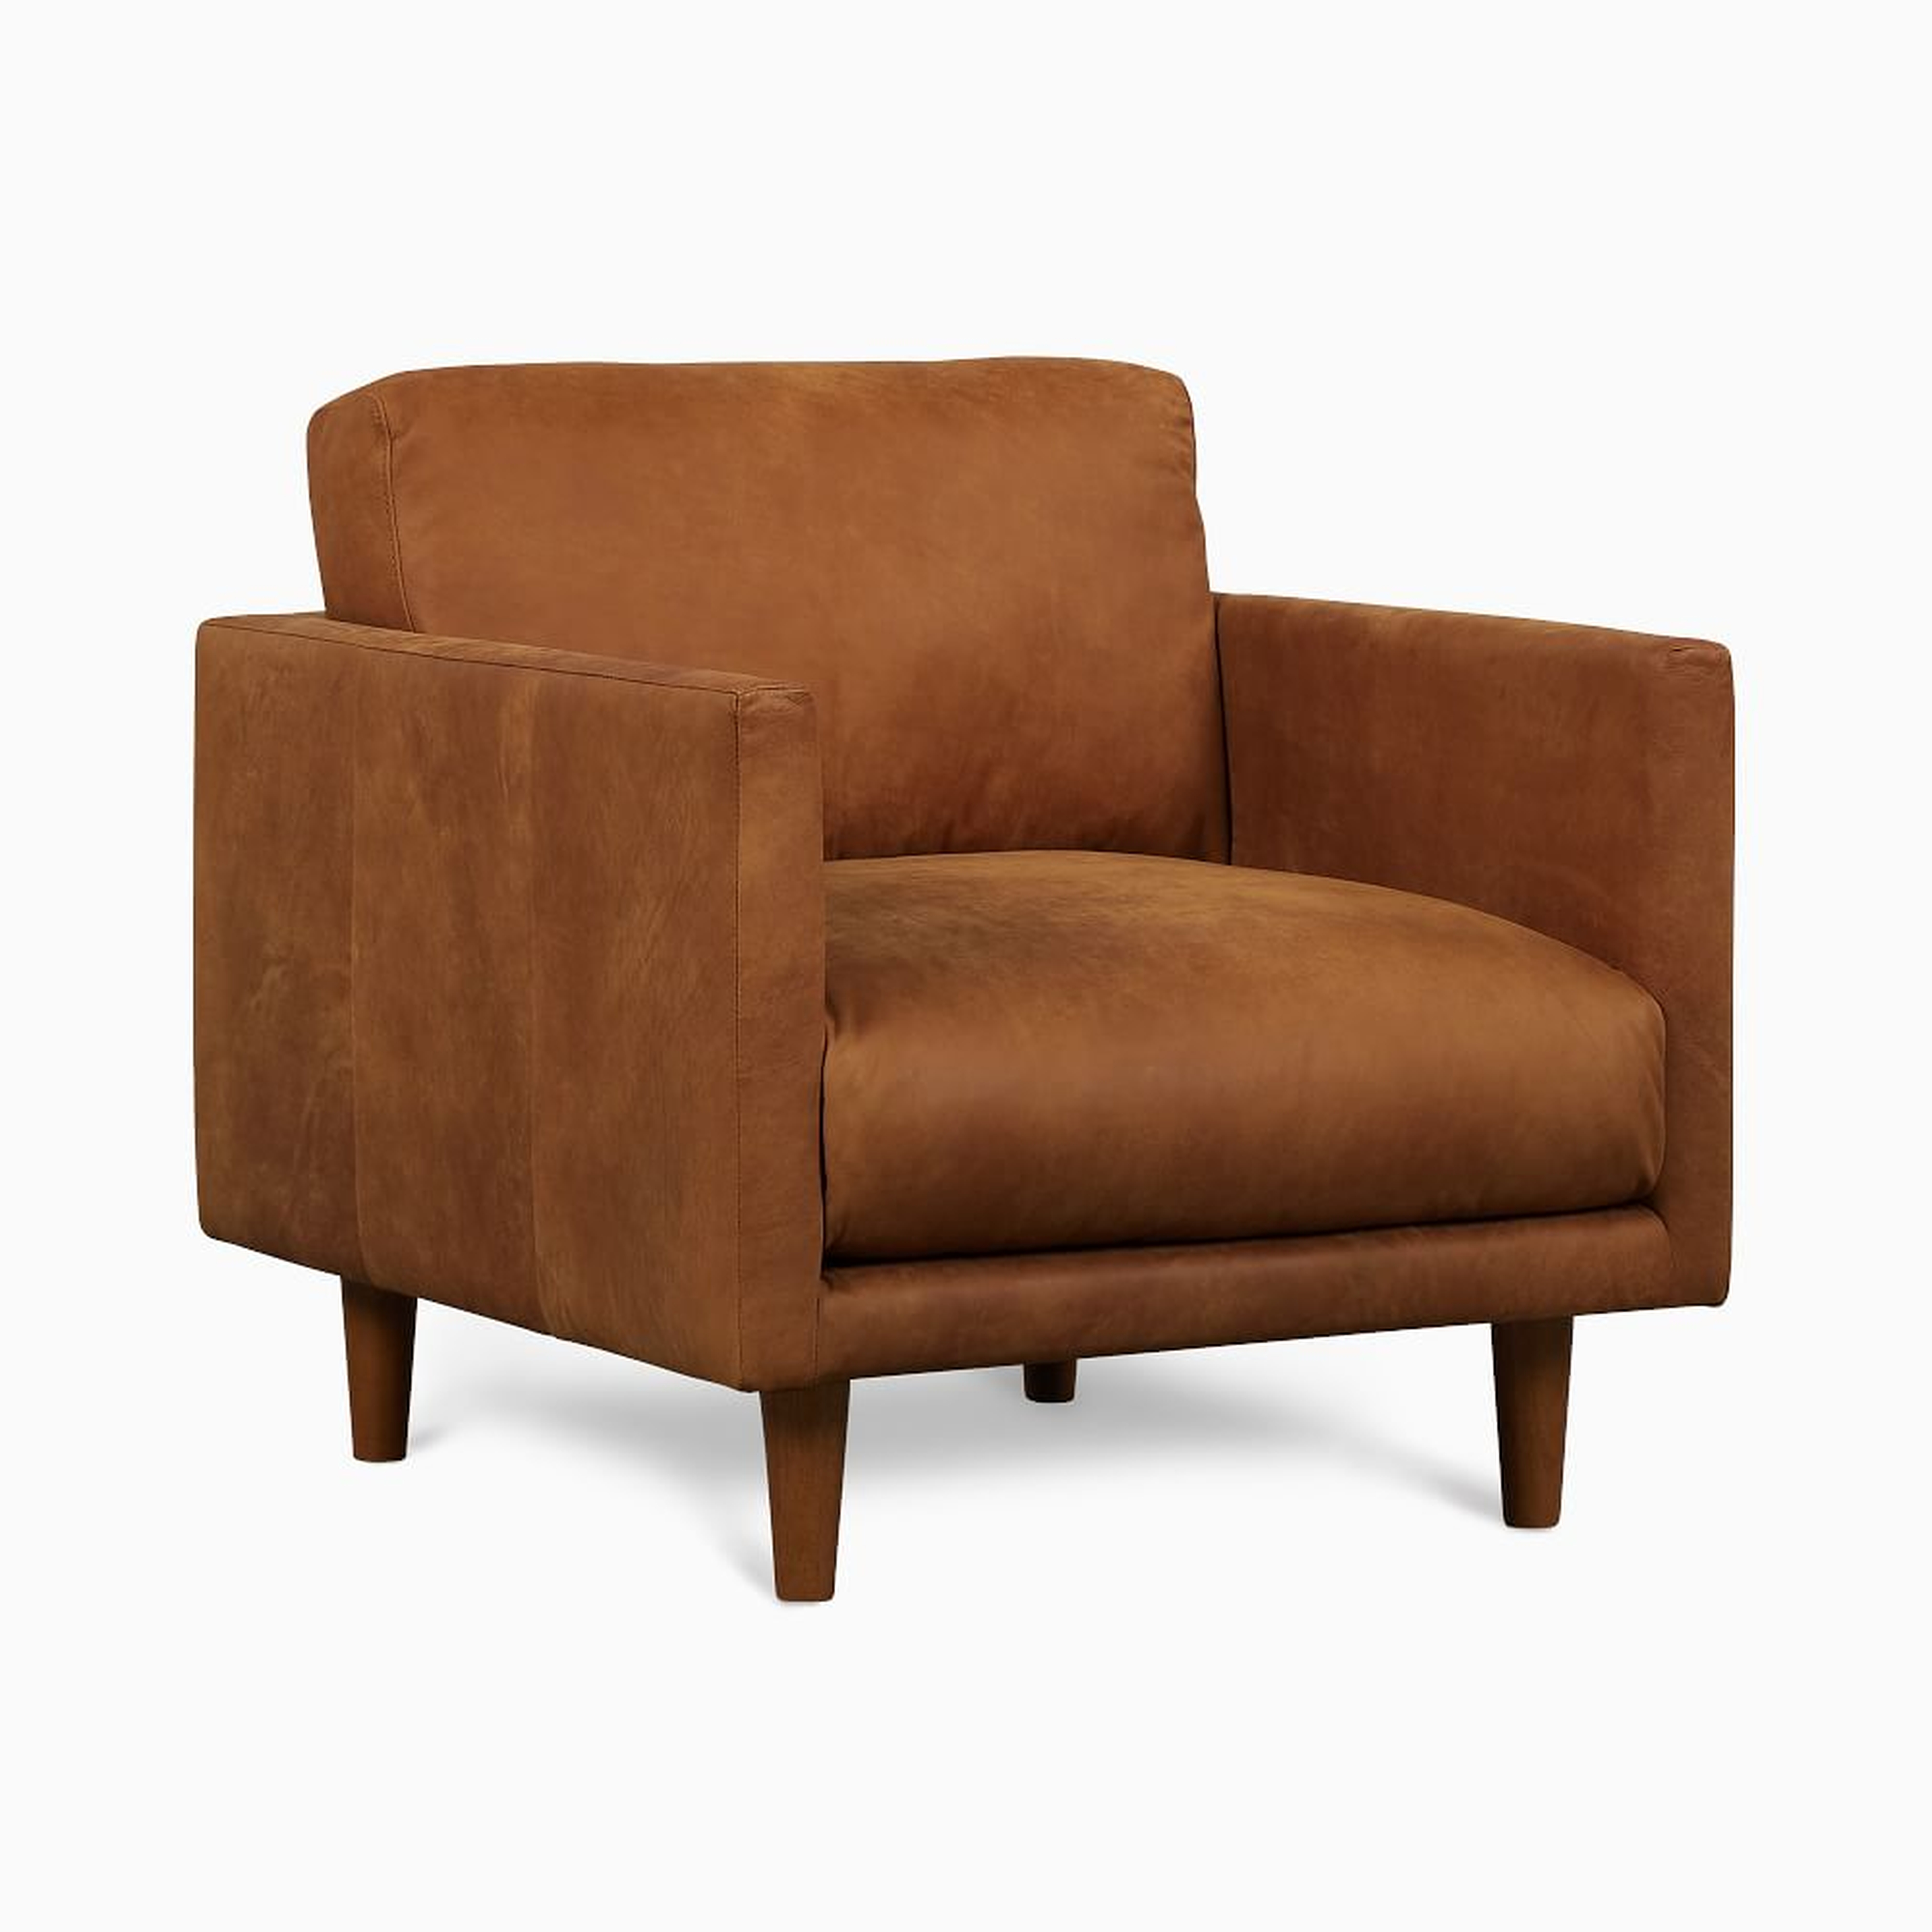 Rylan Chair Tan Outback Leather Almond - West Elm